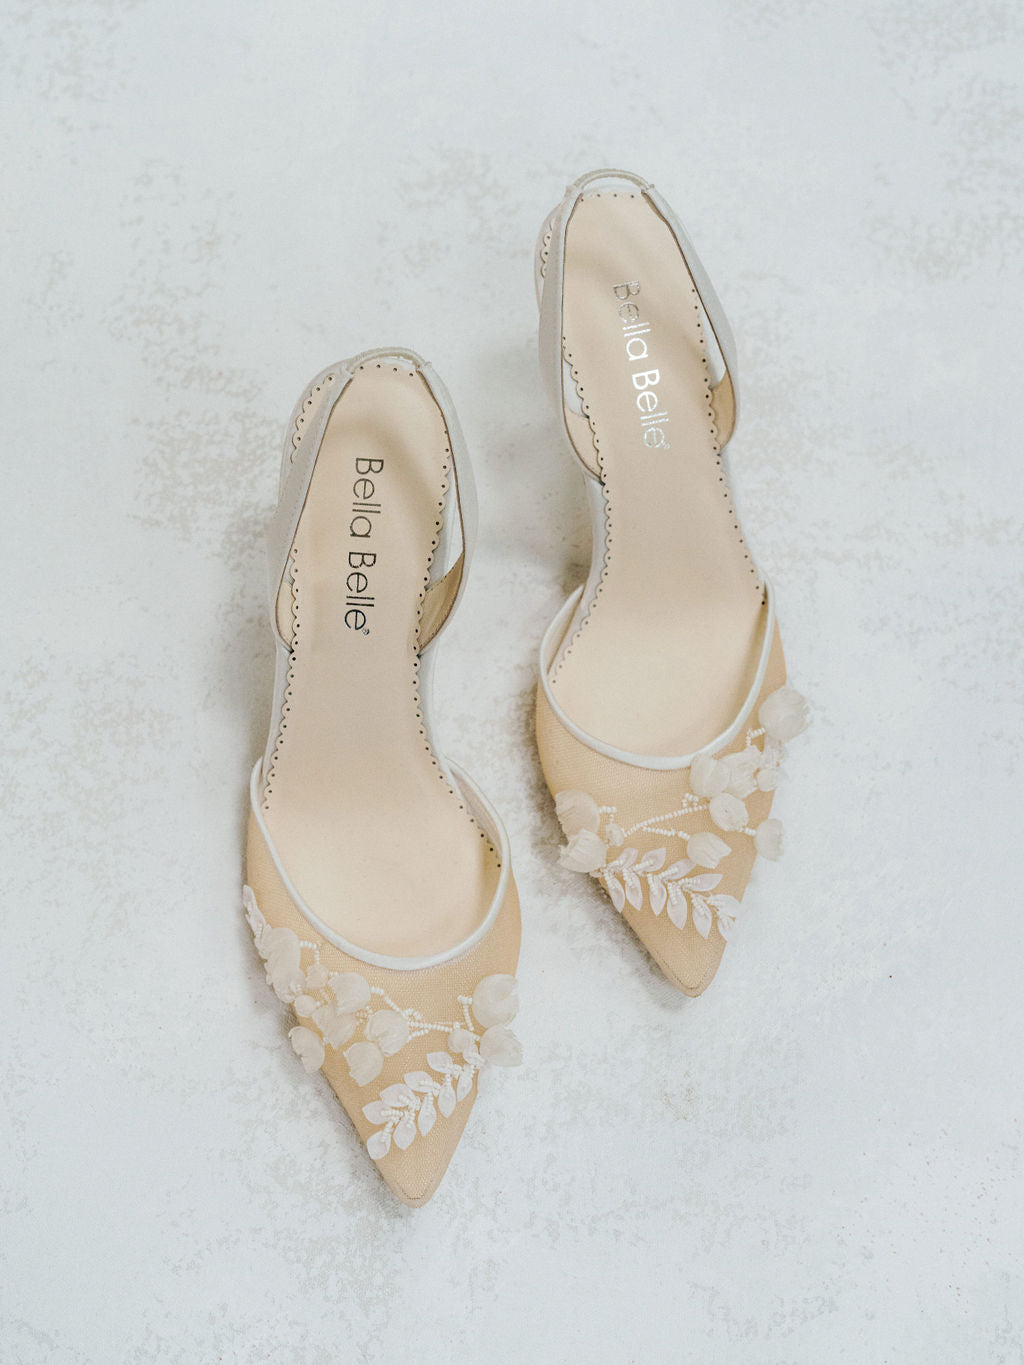 THE 2022 POPULAR WEDDING SHOES TRENDS